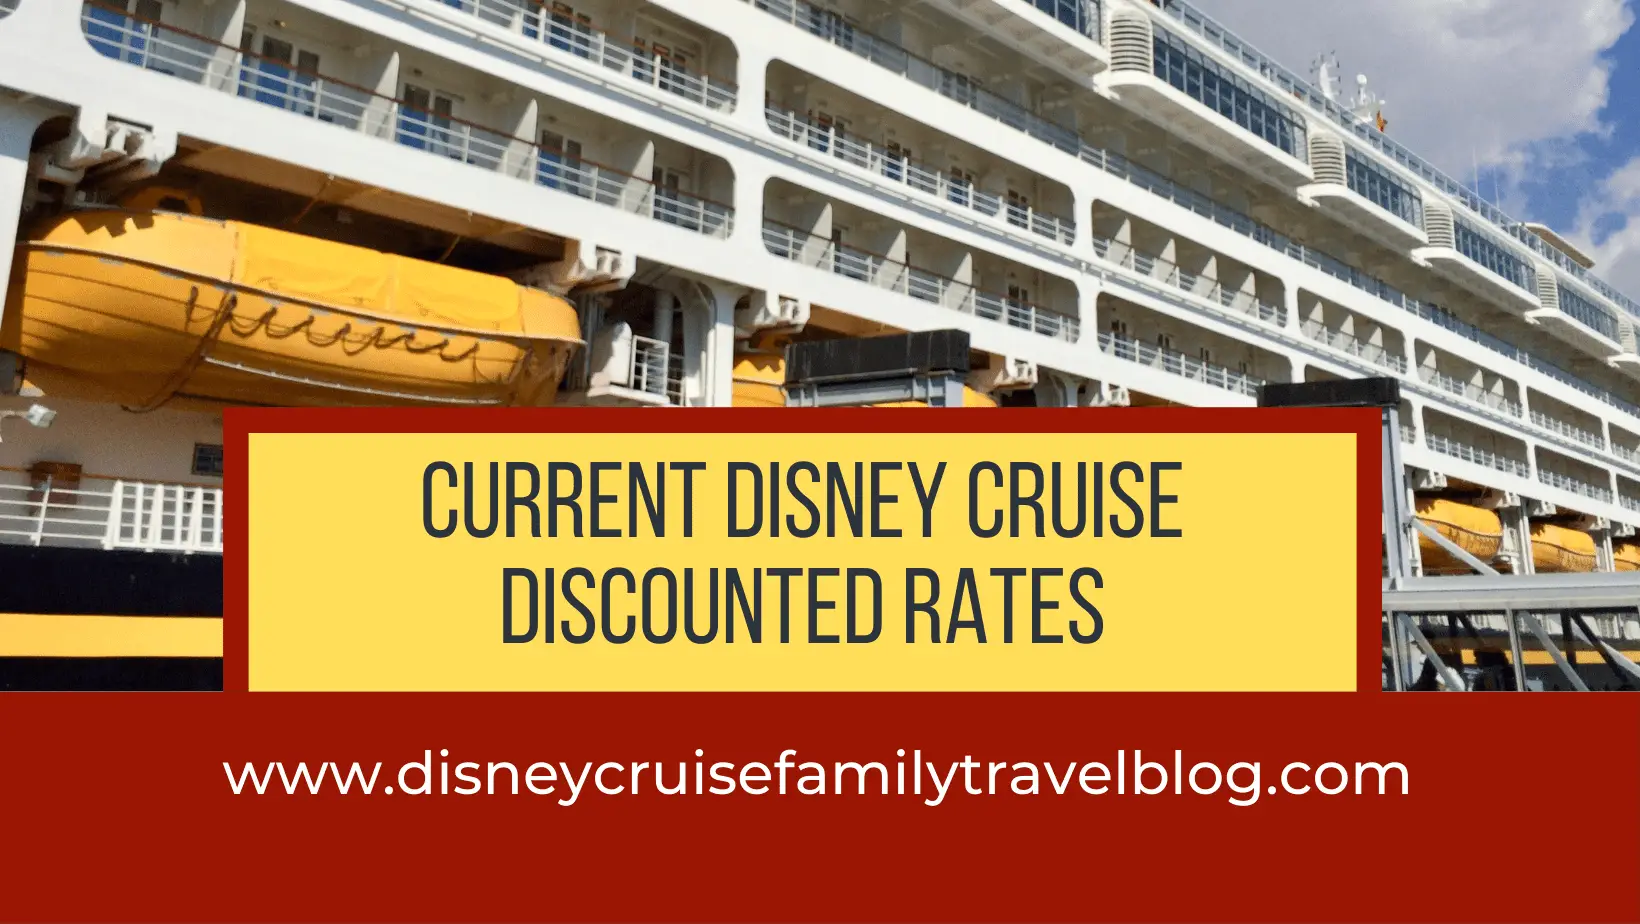 are there any disney cruise discounts